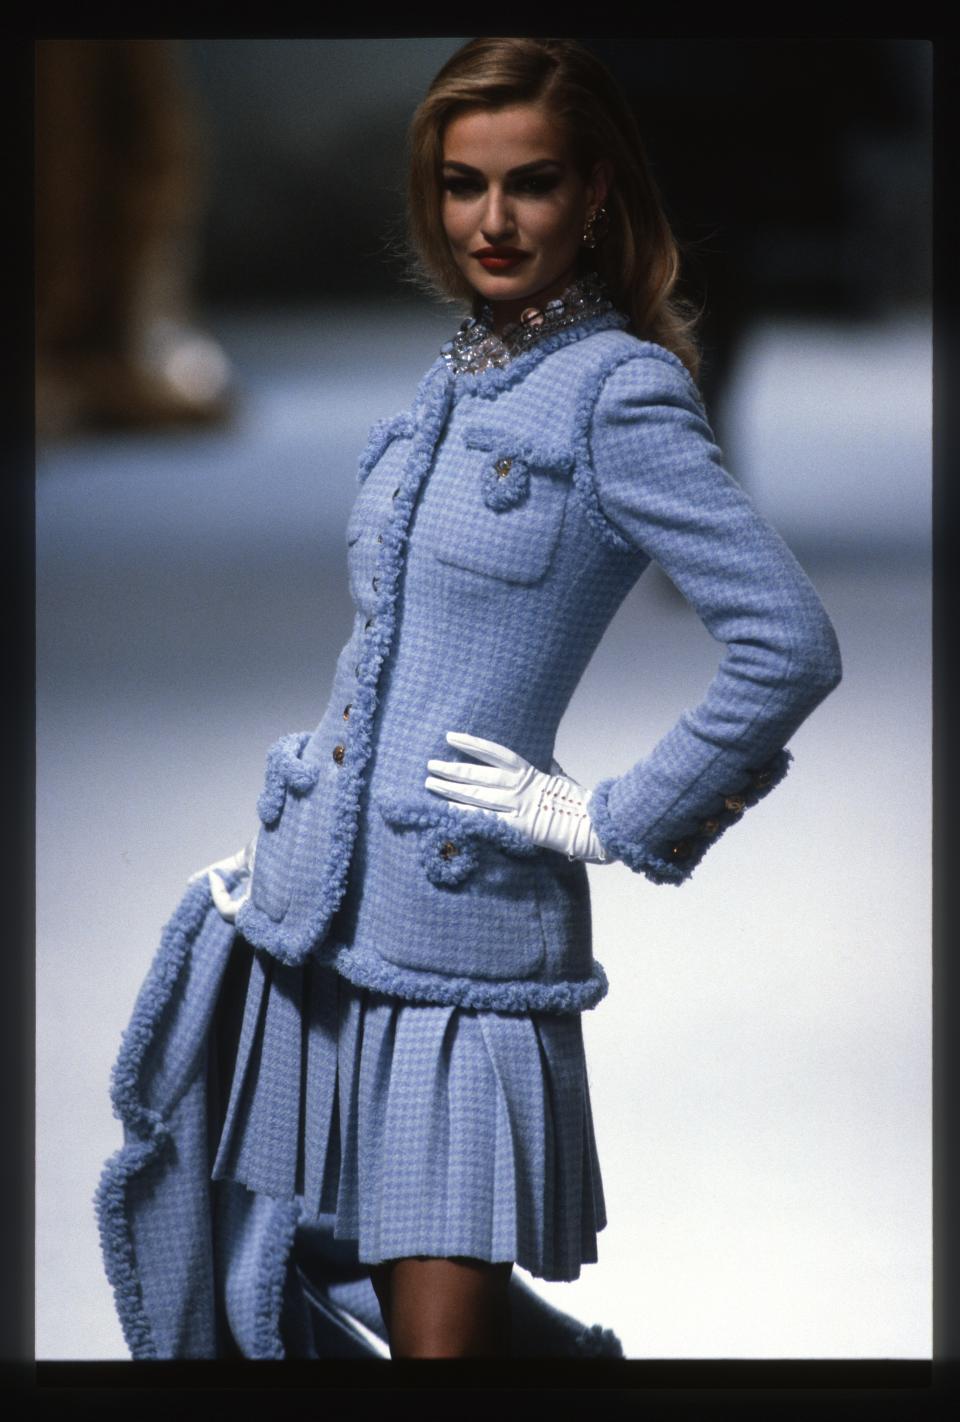 Model Karen Mulder walks the runway during the Chanel fall/winter 1991 couture show in Paris.